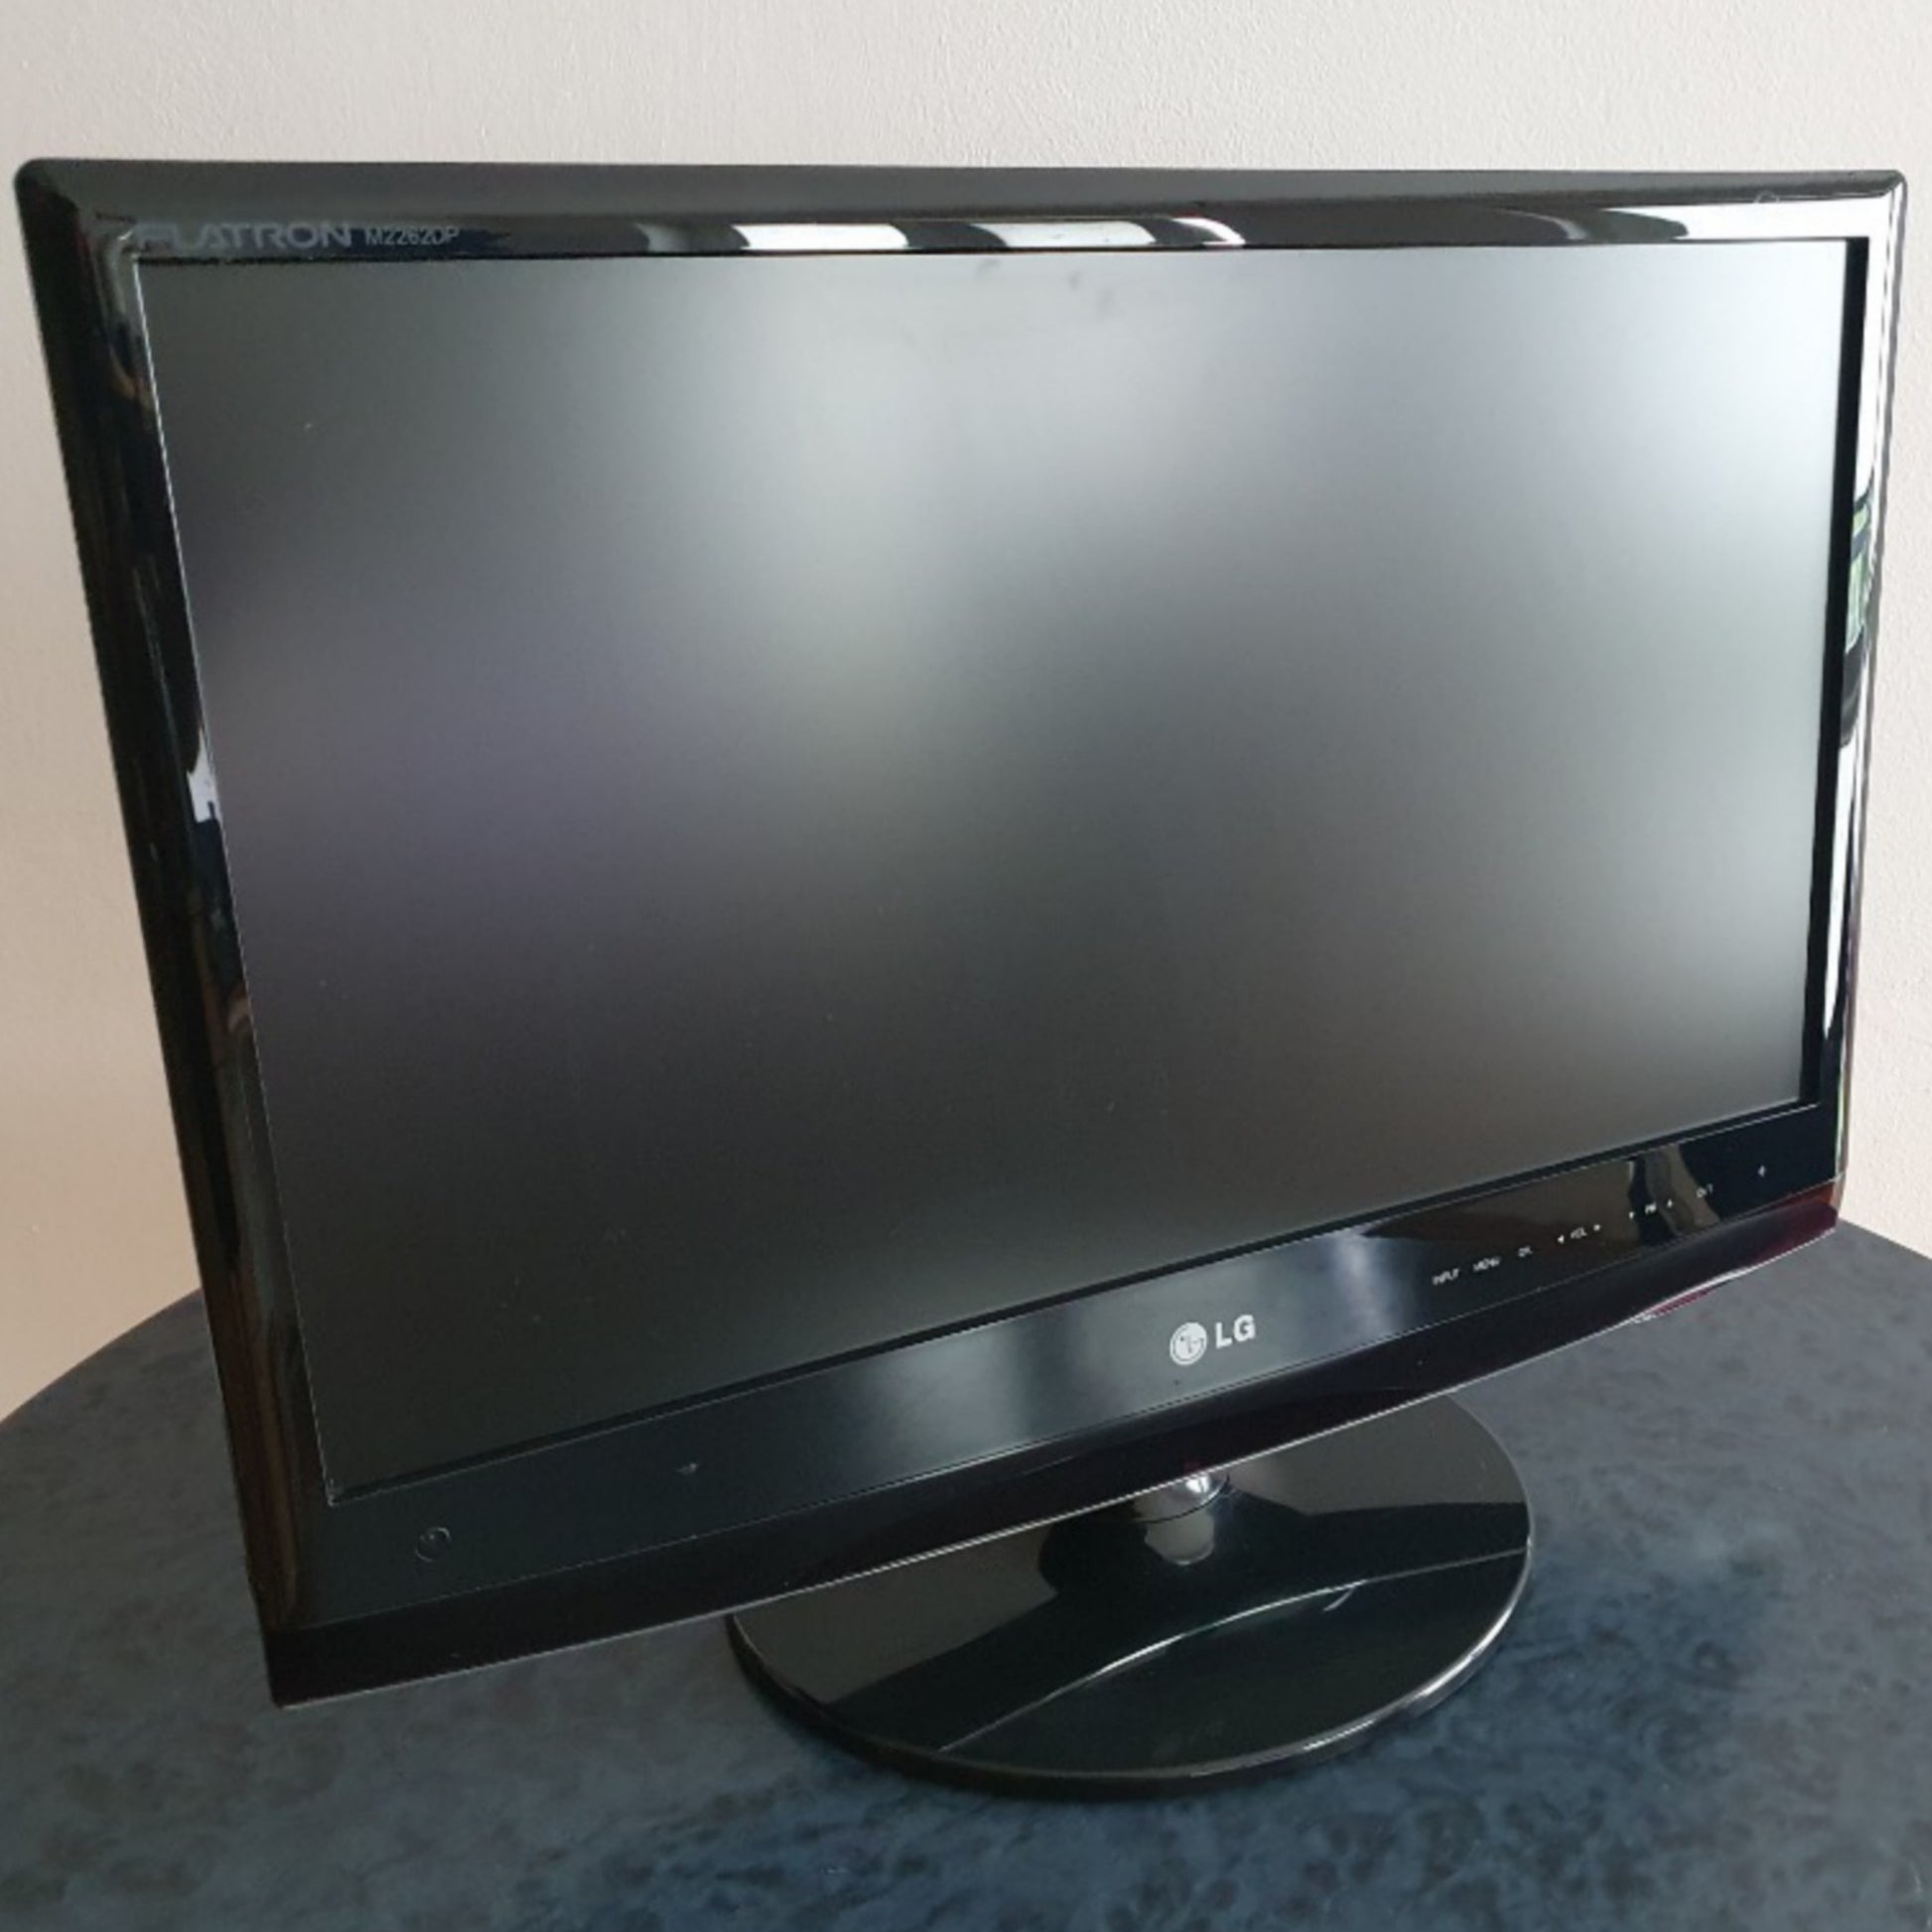 LG 22 Inch M2262DP Full HD LCD TV - Front View